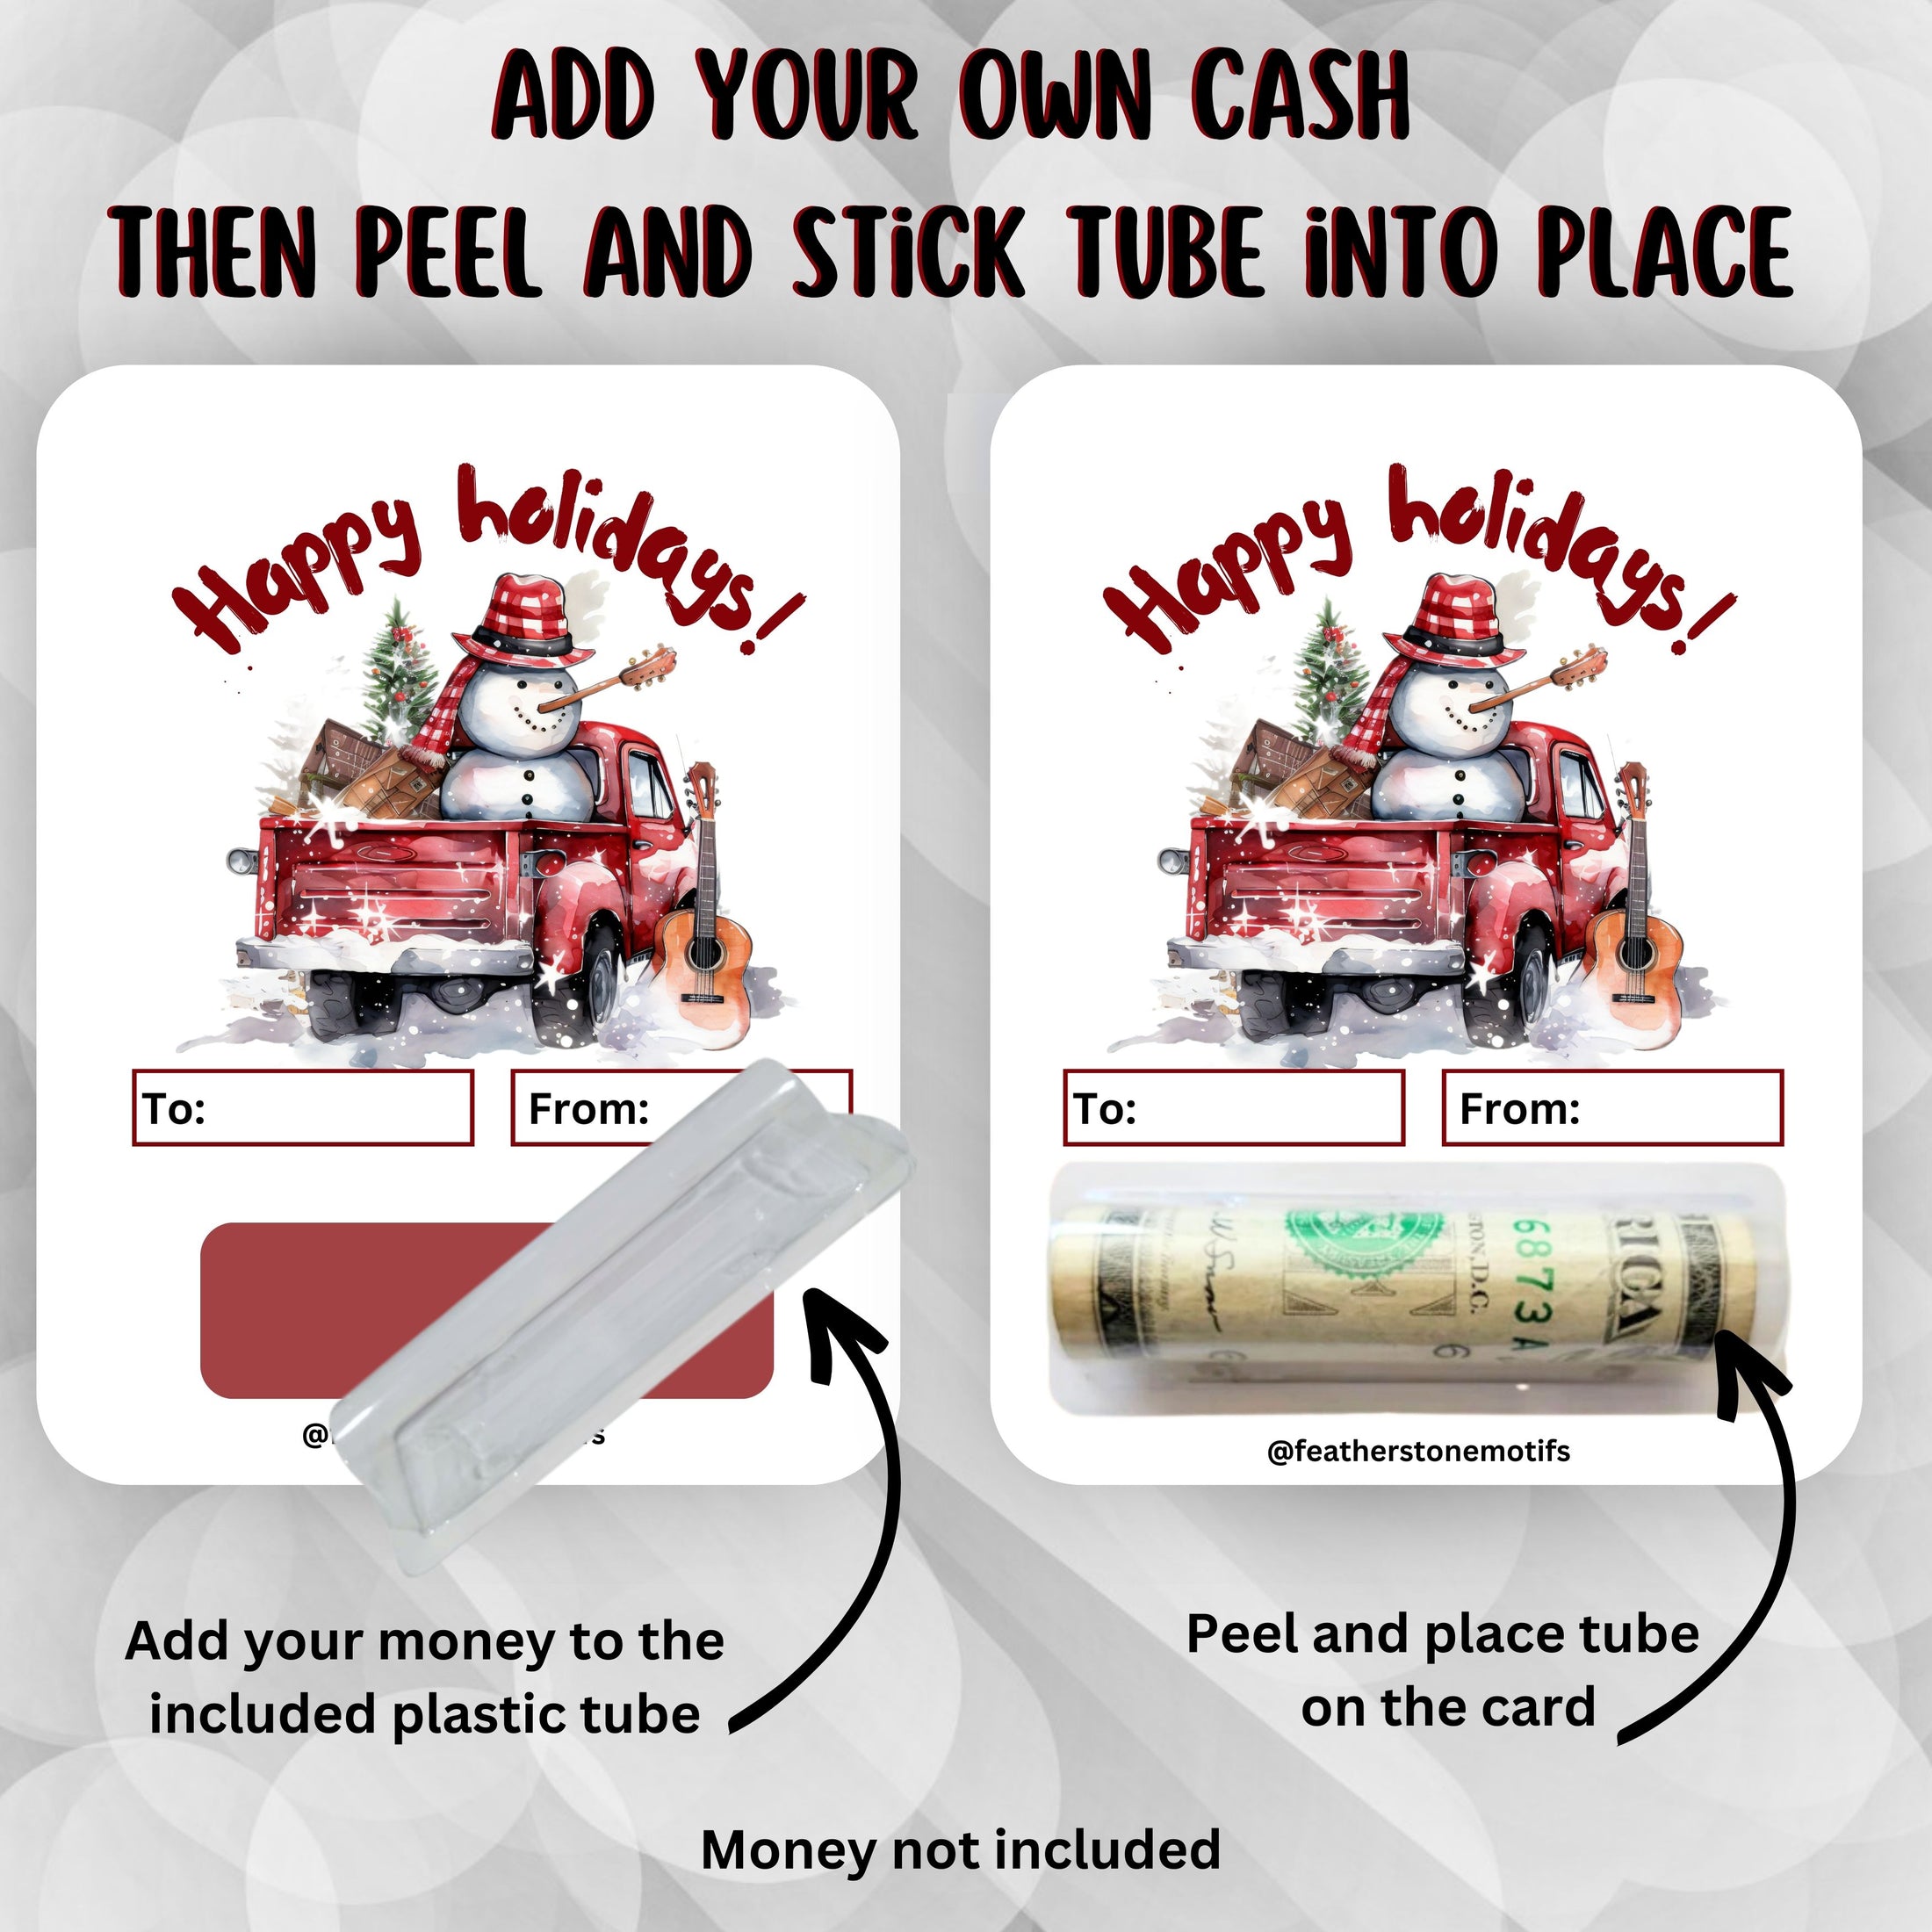 This image shows how to attach the money tube to the Pickup Holidays Money Card.